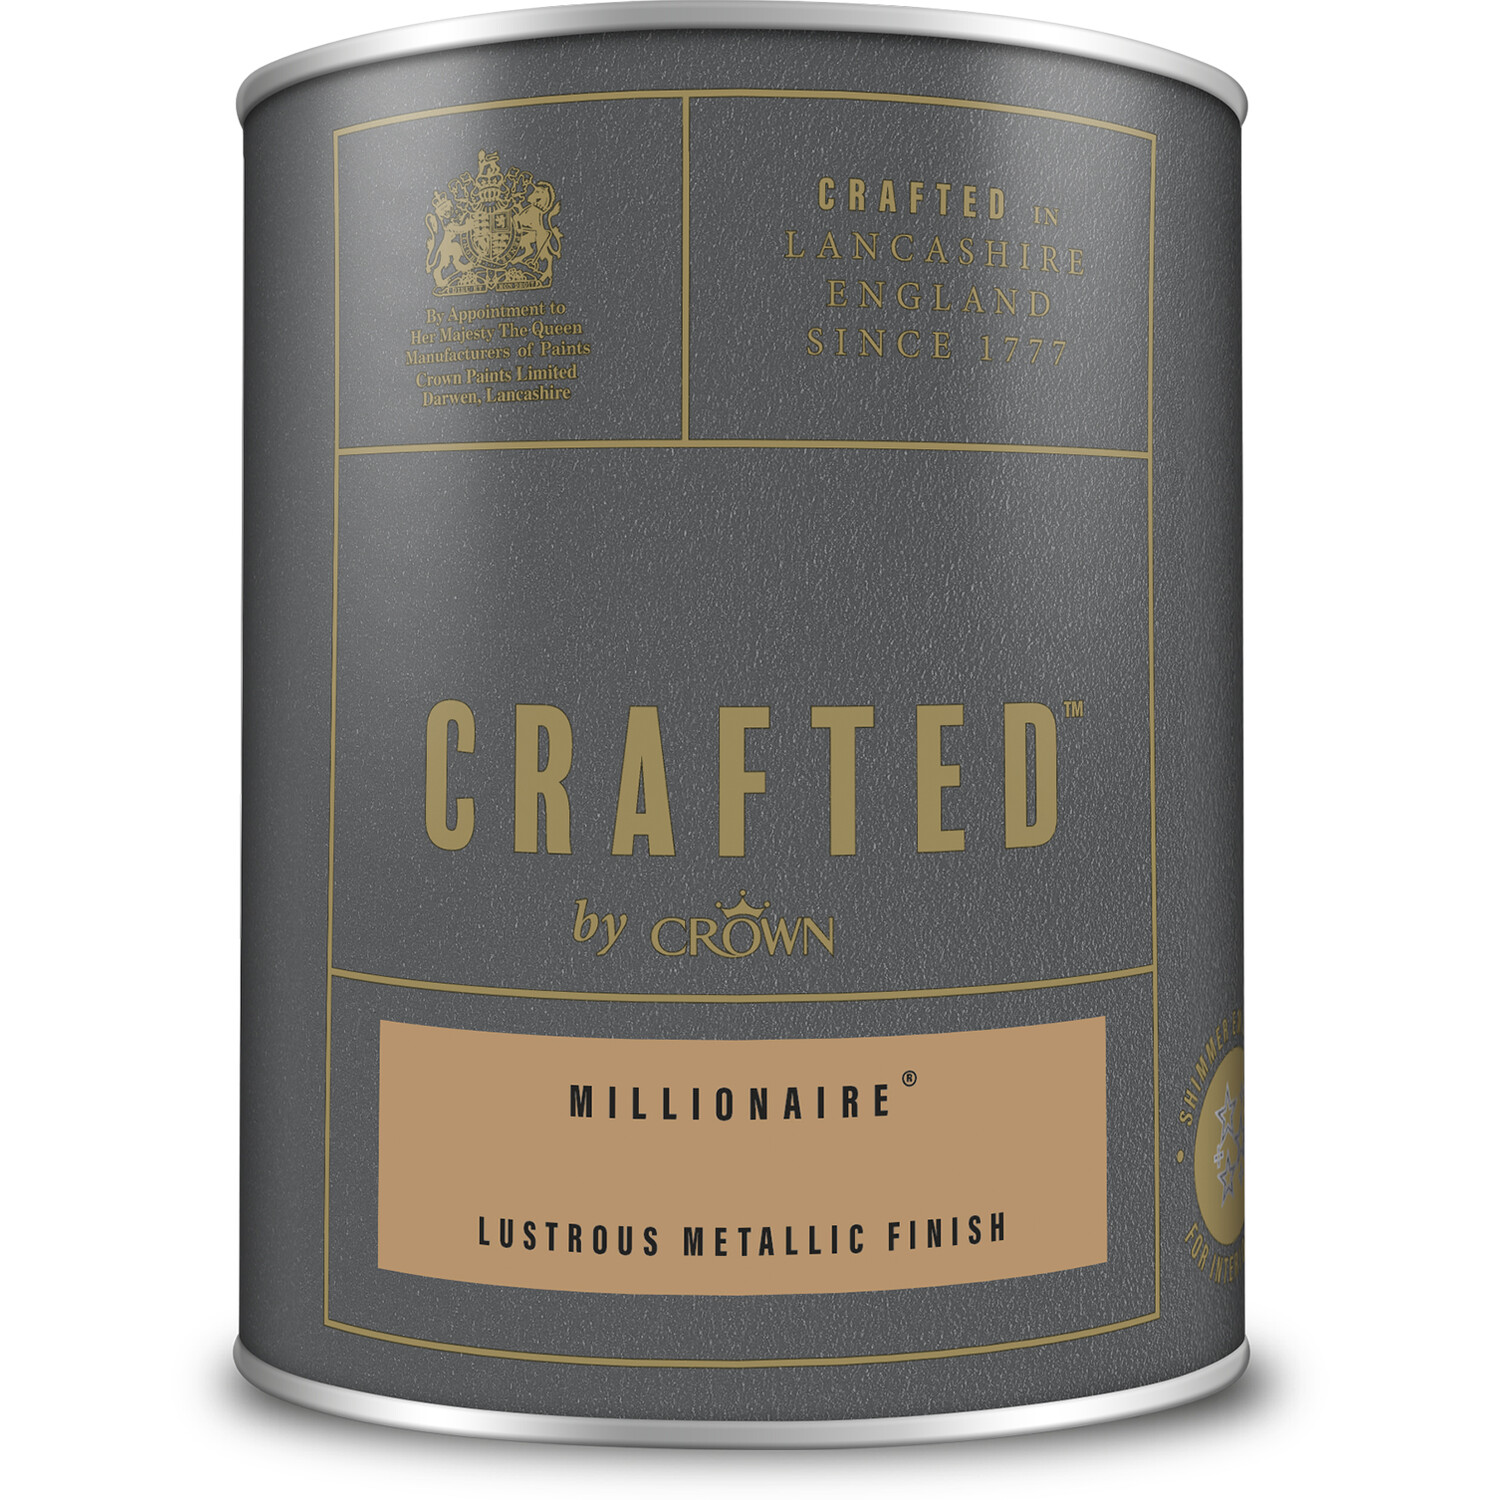 Crown Crafted Walls Wood and Metal Millionaire Lustrous Metallic Shimmer Emulsion Paint 1.25L Image 2